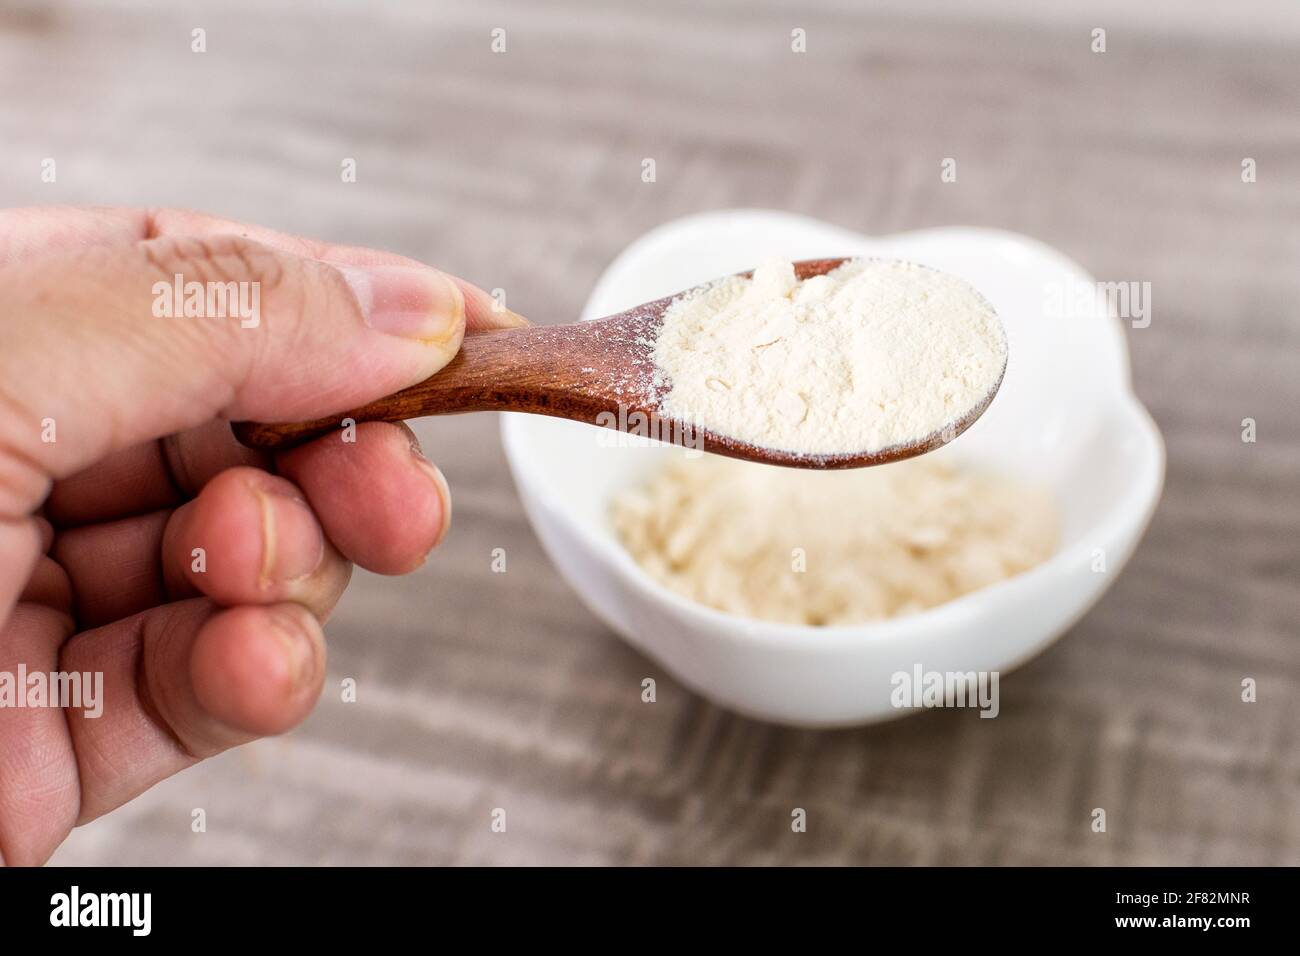 A closeup of a hand holding a wooden spoon with garlic powder. Stock Photo